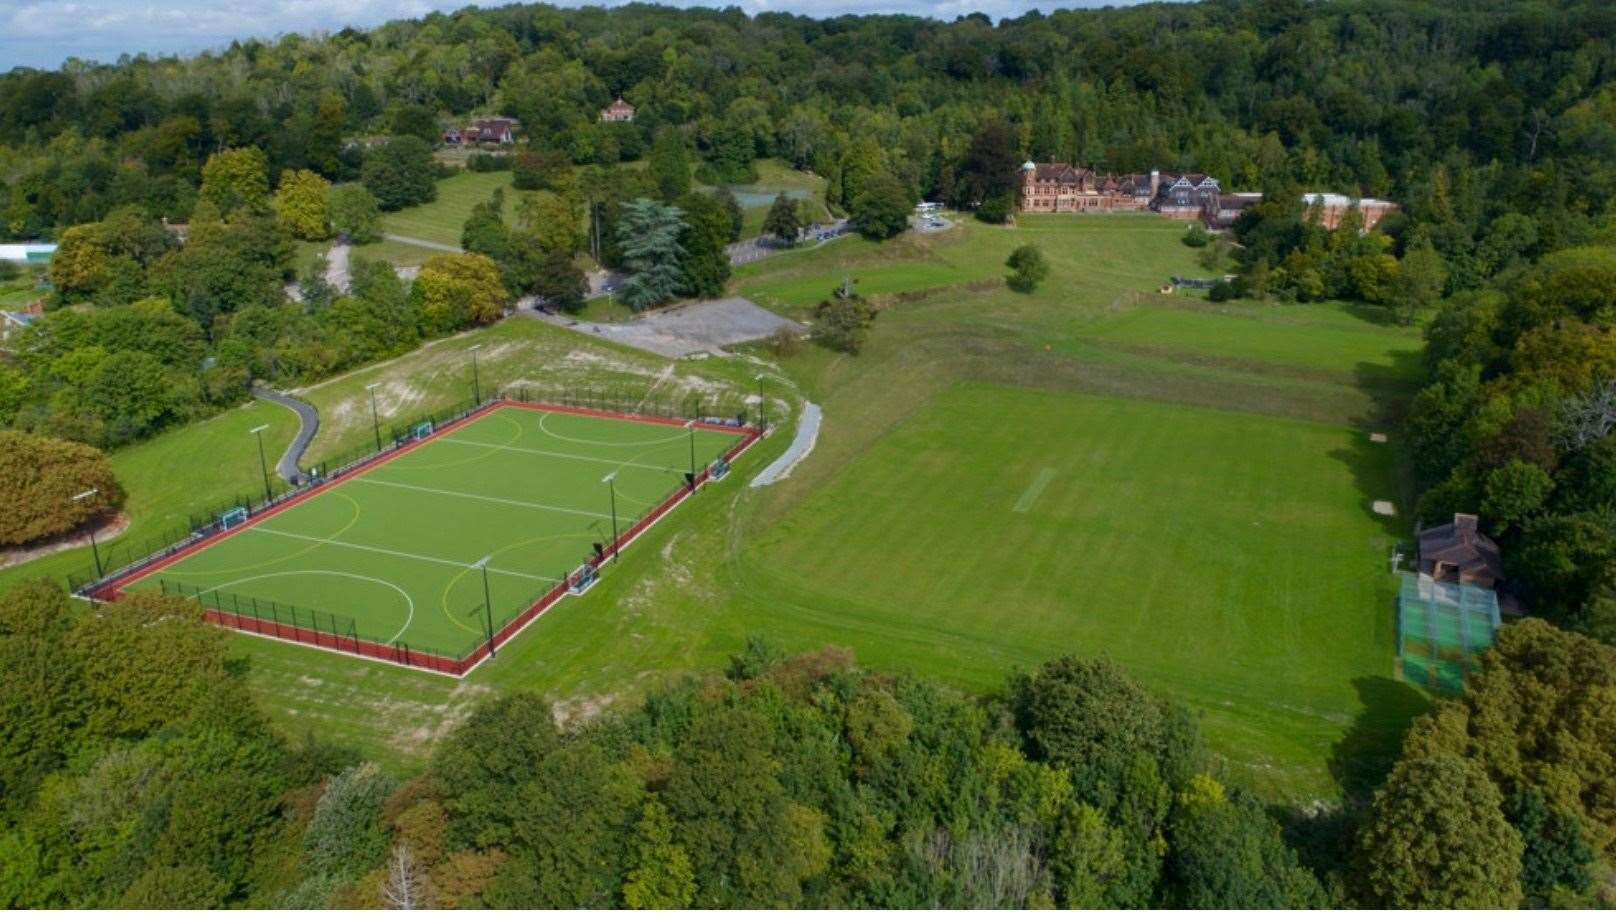 The new pitch at St Michael's Prep School seen from the air